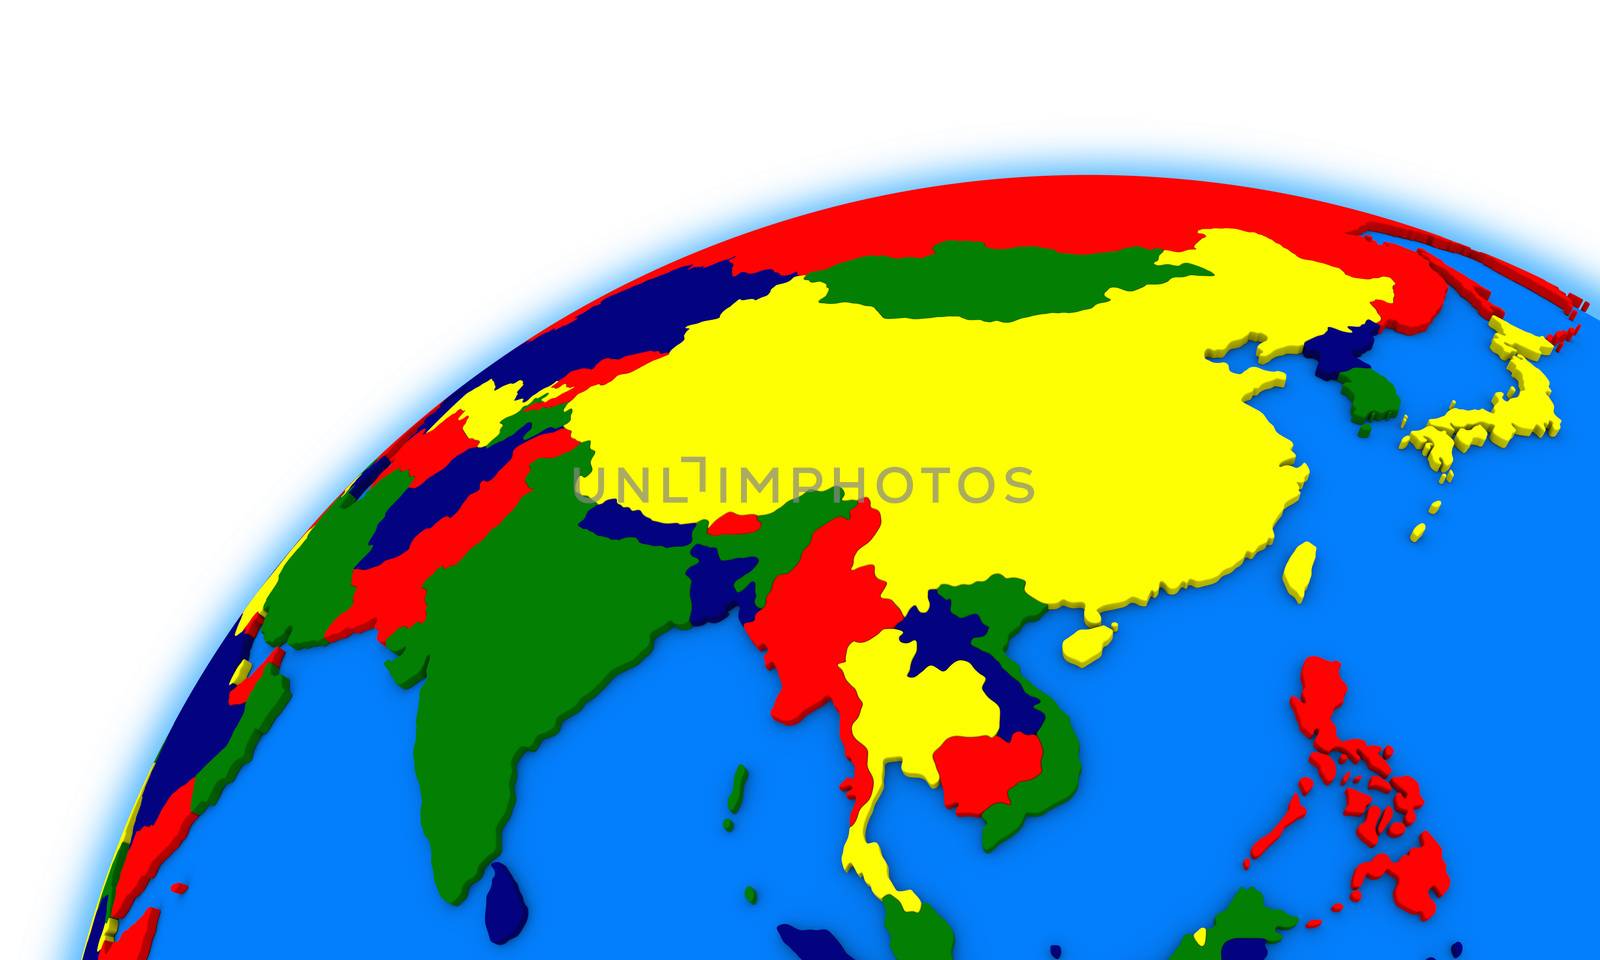 southeast Asia on globe political map by Harvepino